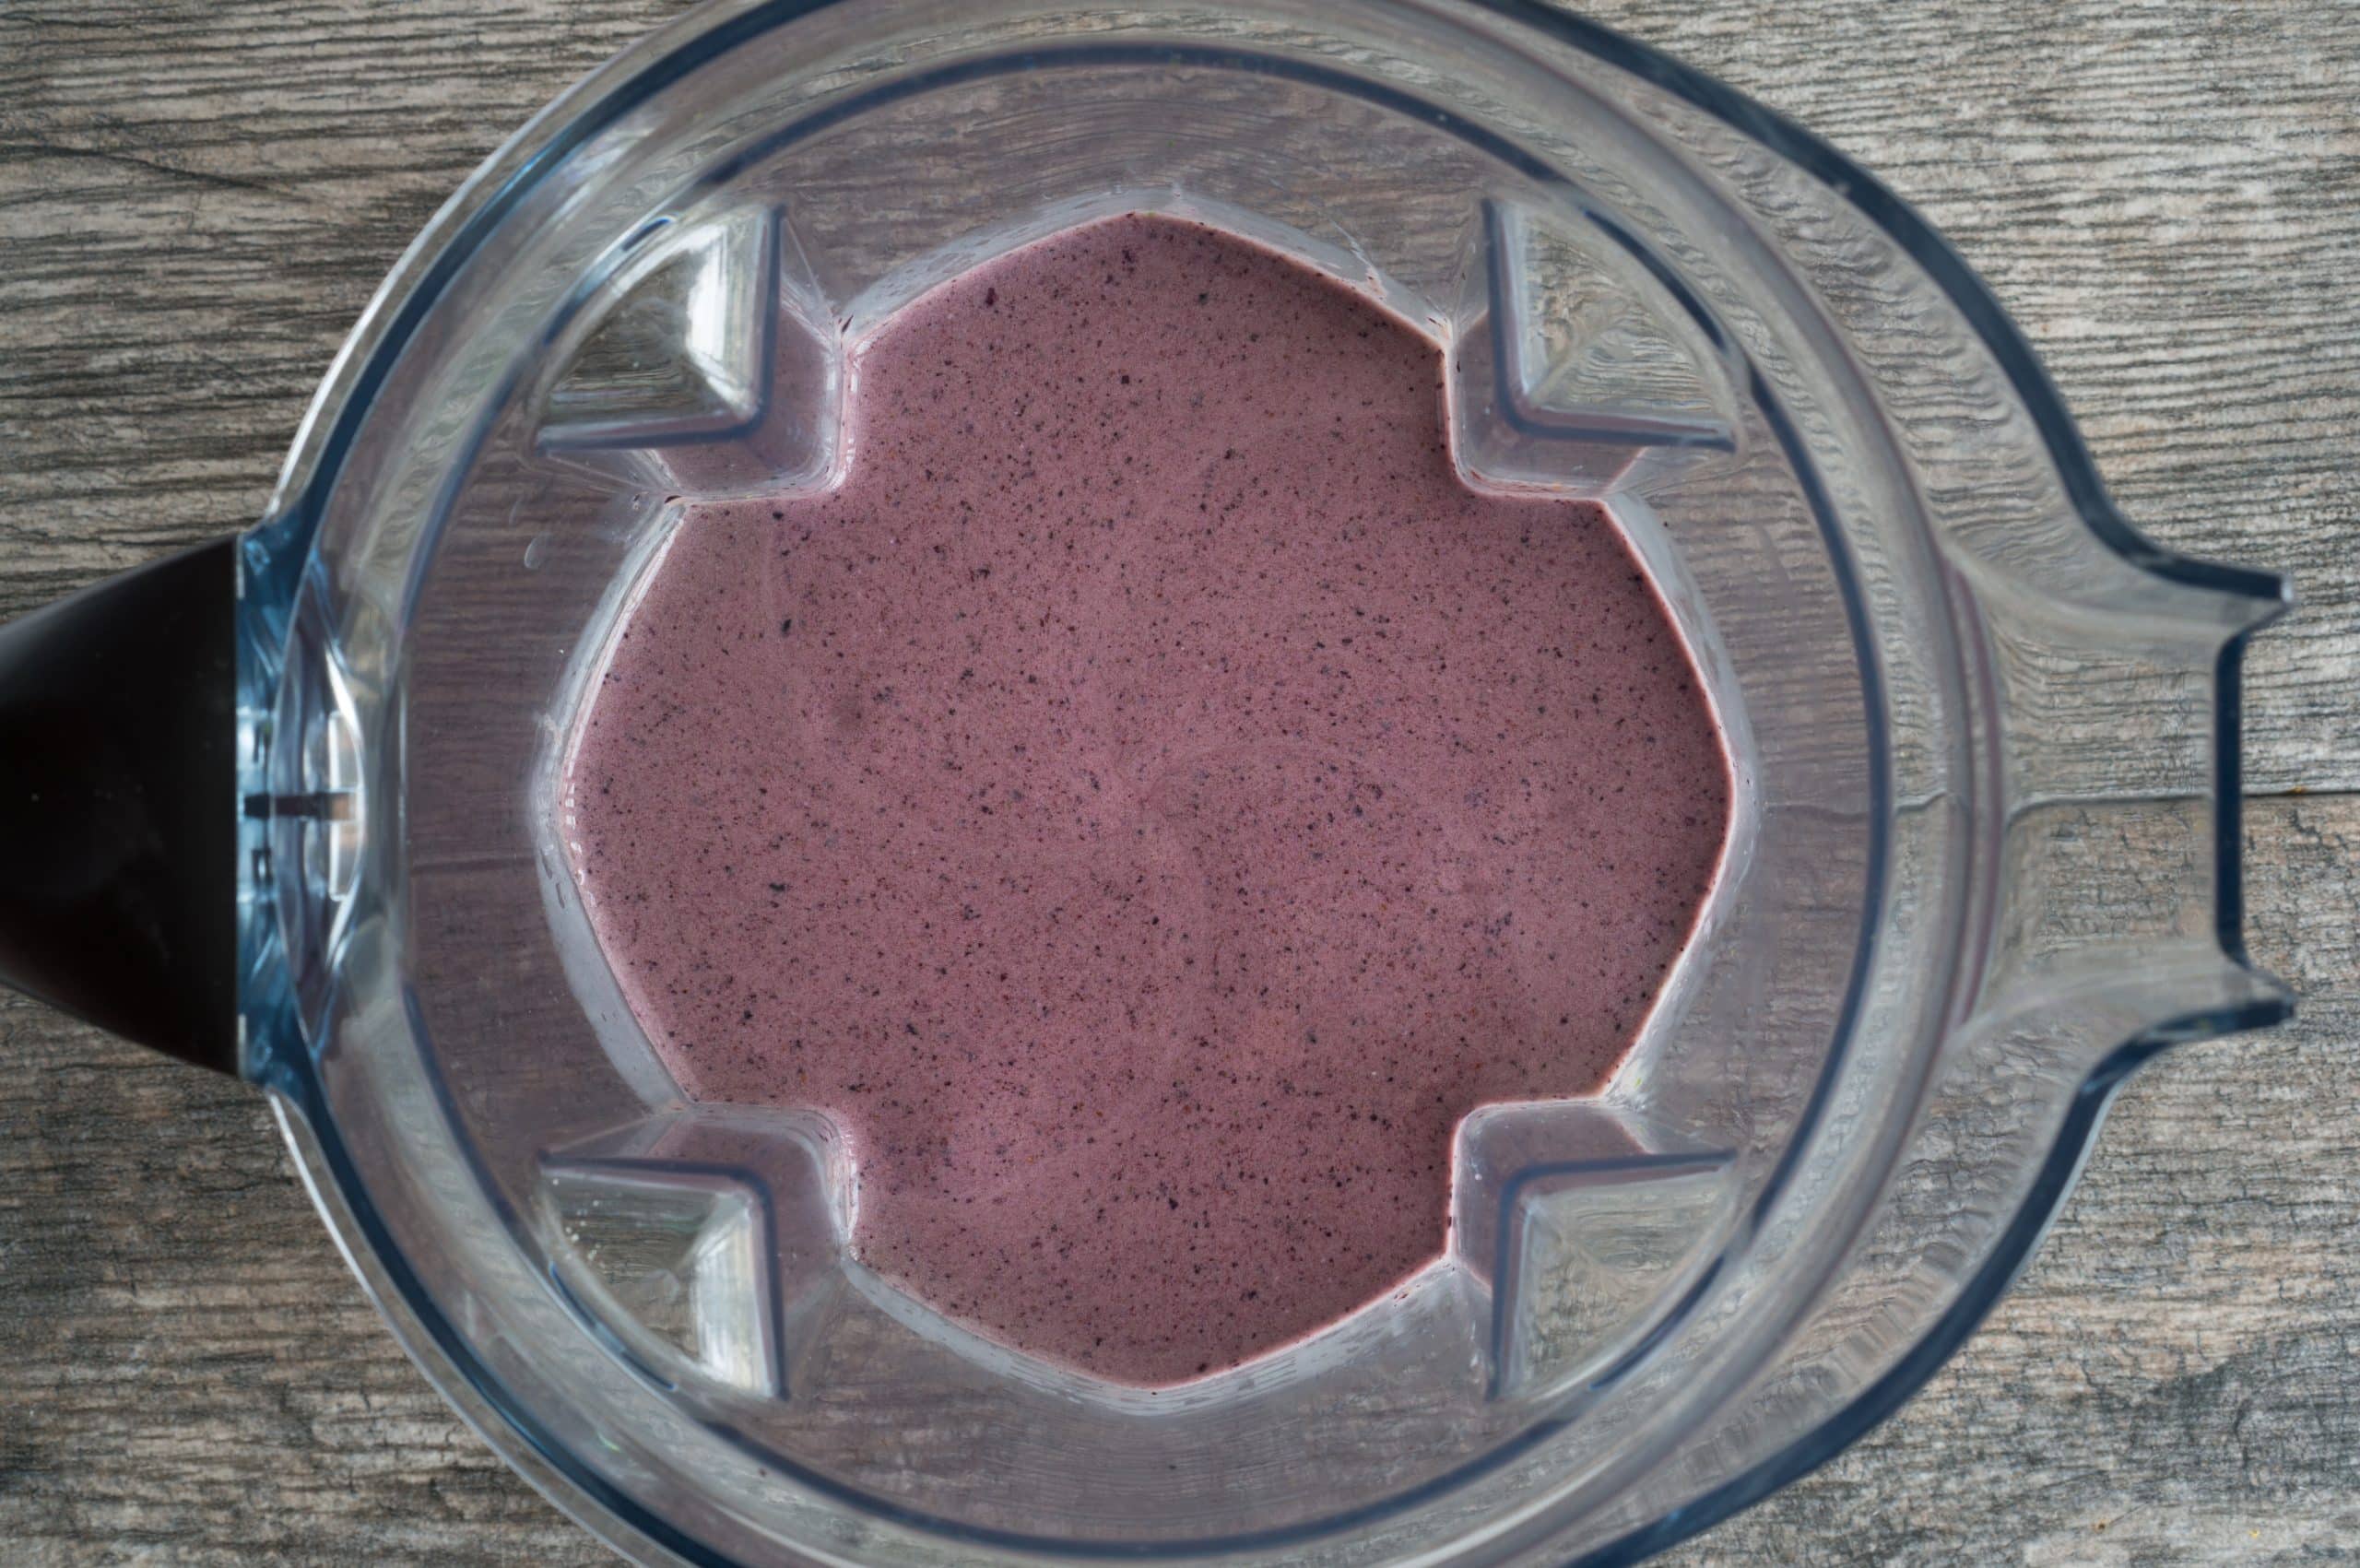 Blueberry Avocado Spinach Smoothie shown fully blended freeyourfork